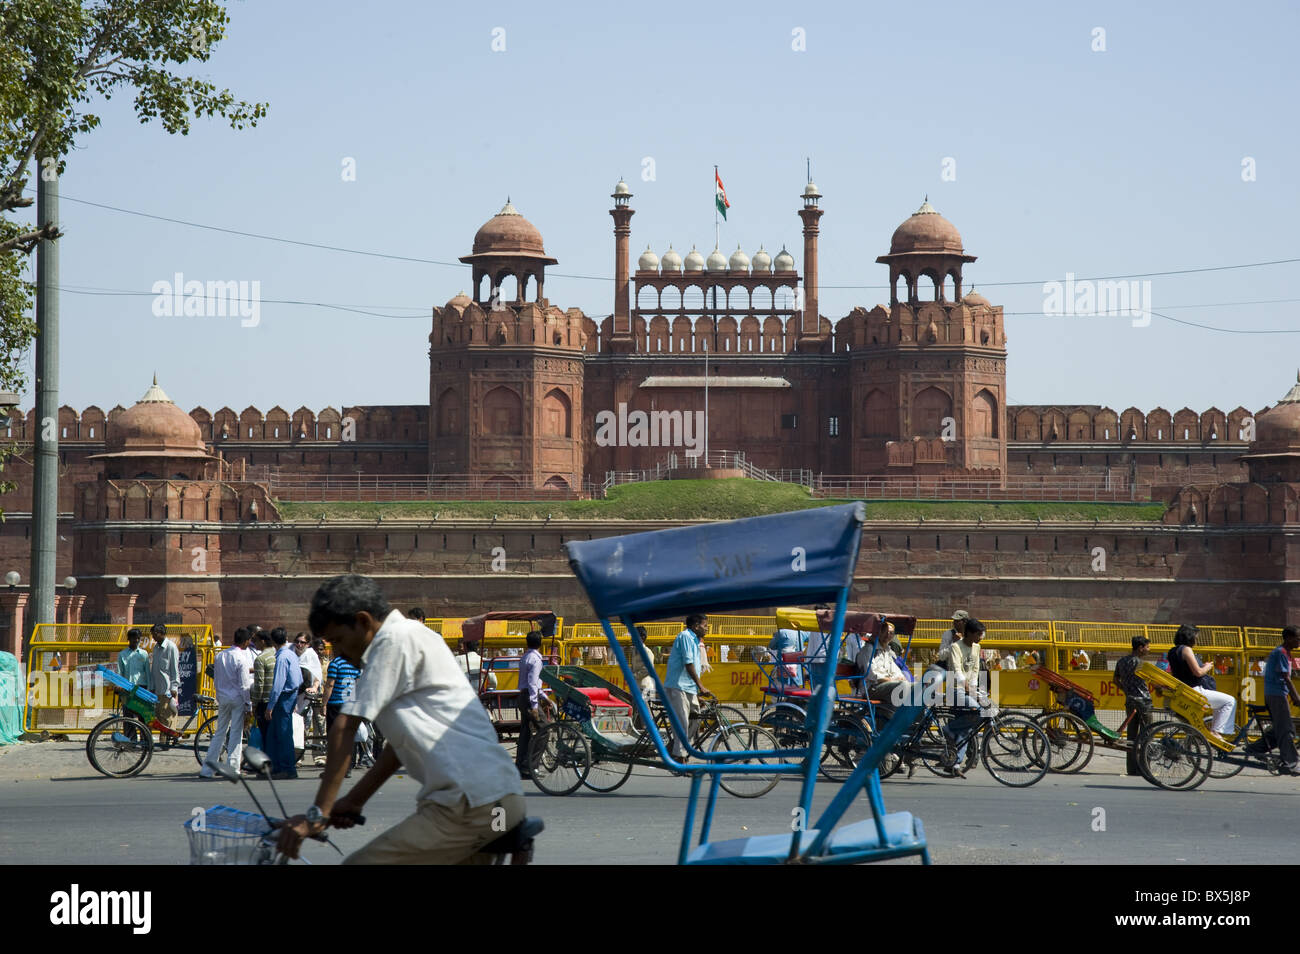 Traffic in front of the Lahore Gate, the red sandstone main gate to the Red Fort, UNESCO World Heritage Site, Old Delhi, India Stock Photo